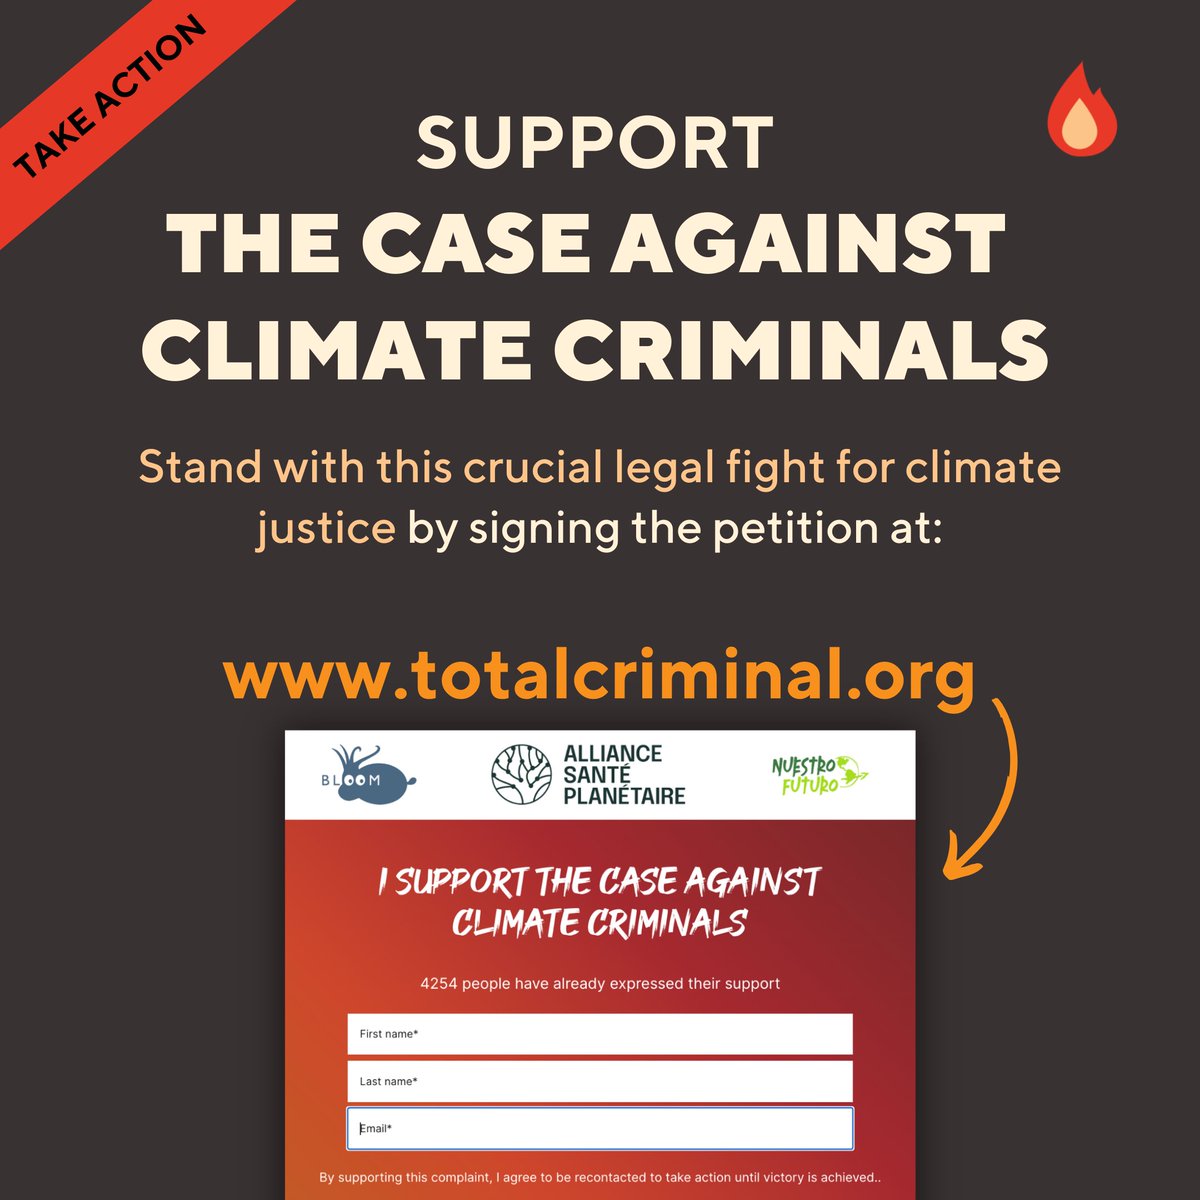 NGOS Bloom, Alliance Saint Planetaire and Nuestro Futuro alongside 8 climate survivors, are taking TotalEnergies board members and investors to court for fueling climate change. Join their fight for justice.
Sign the petition at: totalcriminal.org 
#ClimateAction